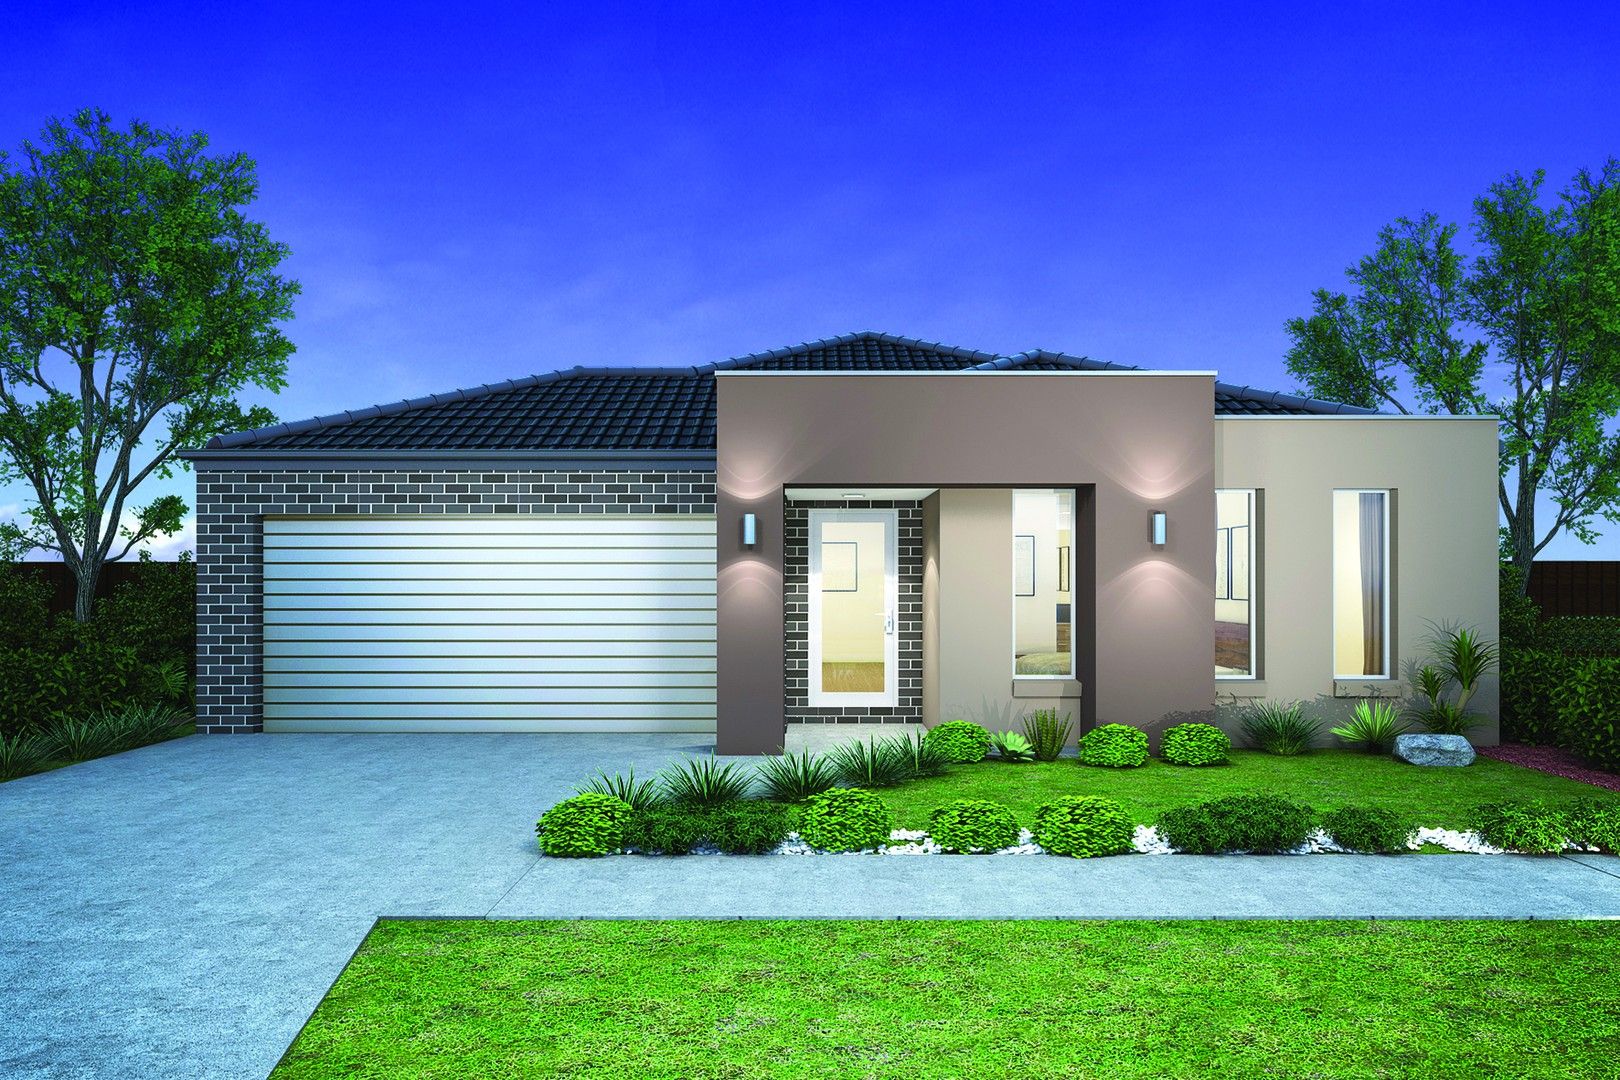 4 bedrooms New House & Land in LOT 734 Taylors Run Estate FRASER RISE VIC, 3336